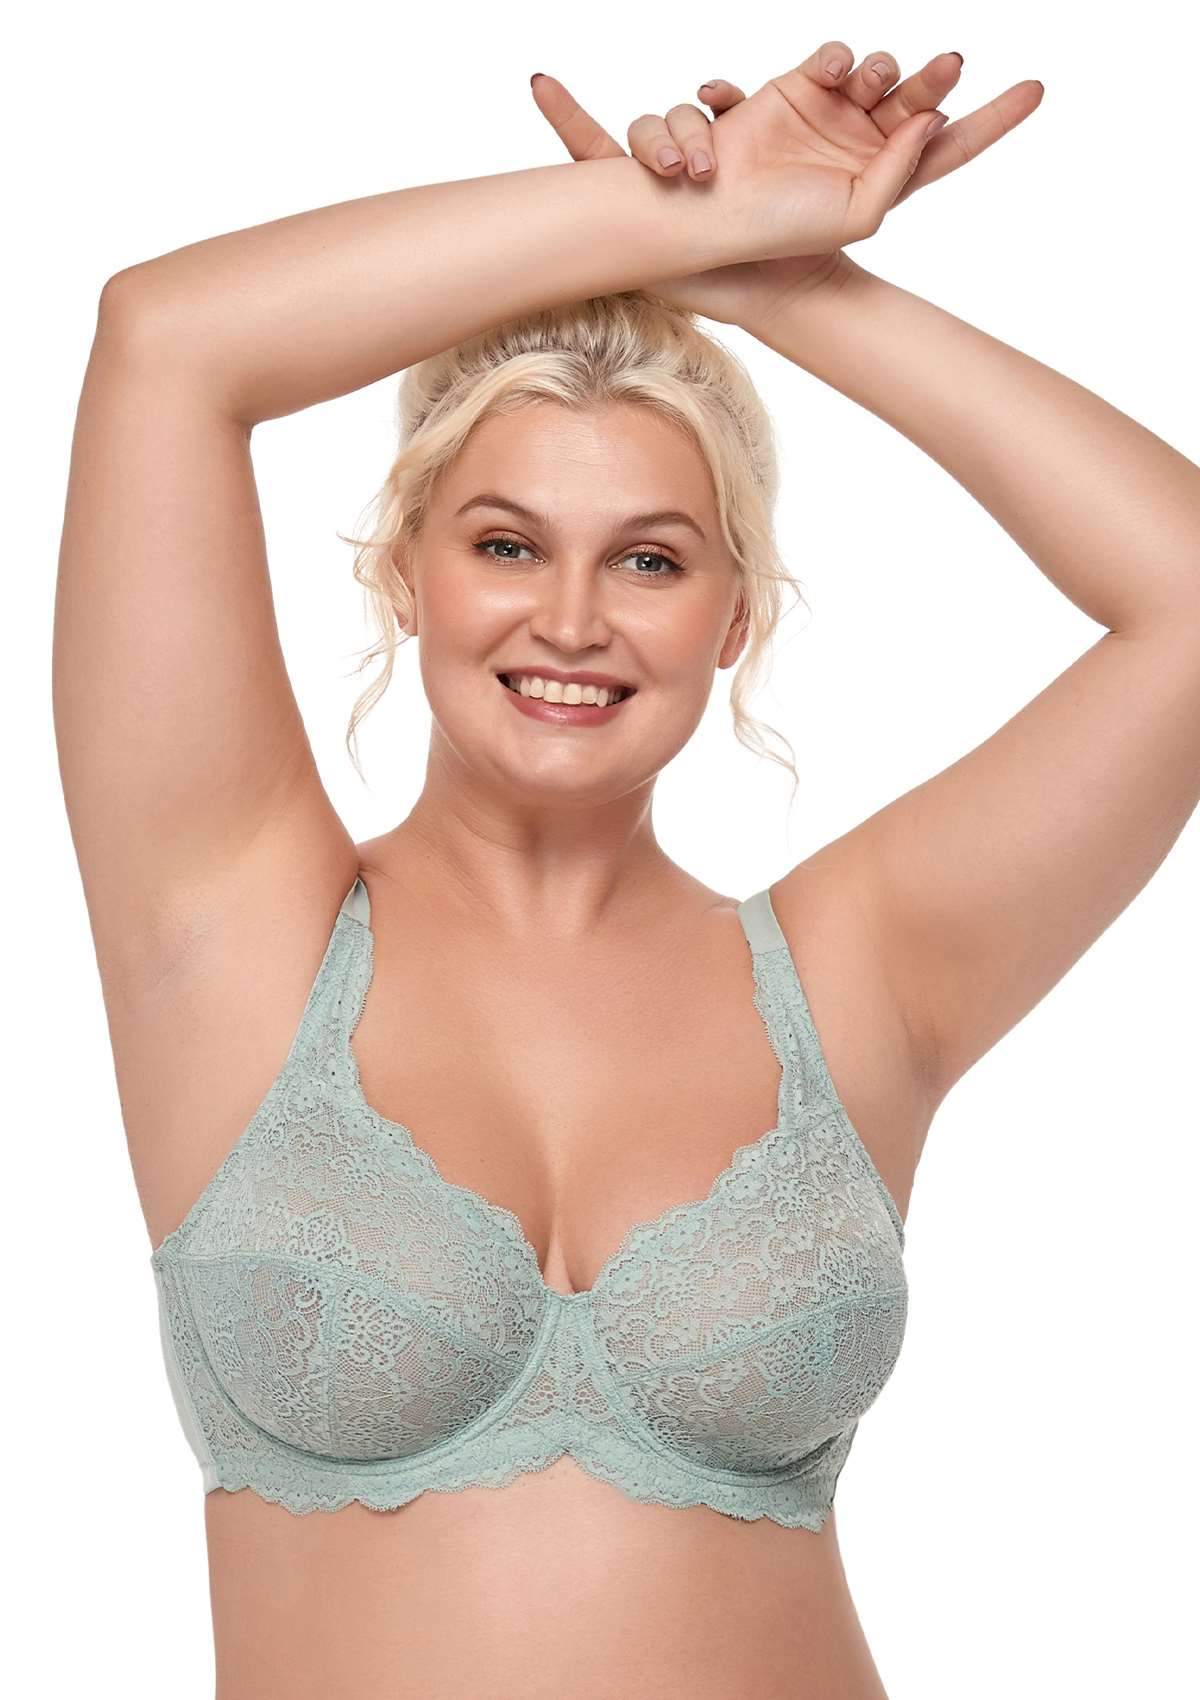 HSIA All-Over Floral Lace: Best Bra For Elderly With Sagging Breasts - Crystal Blue / 34 / DD/E